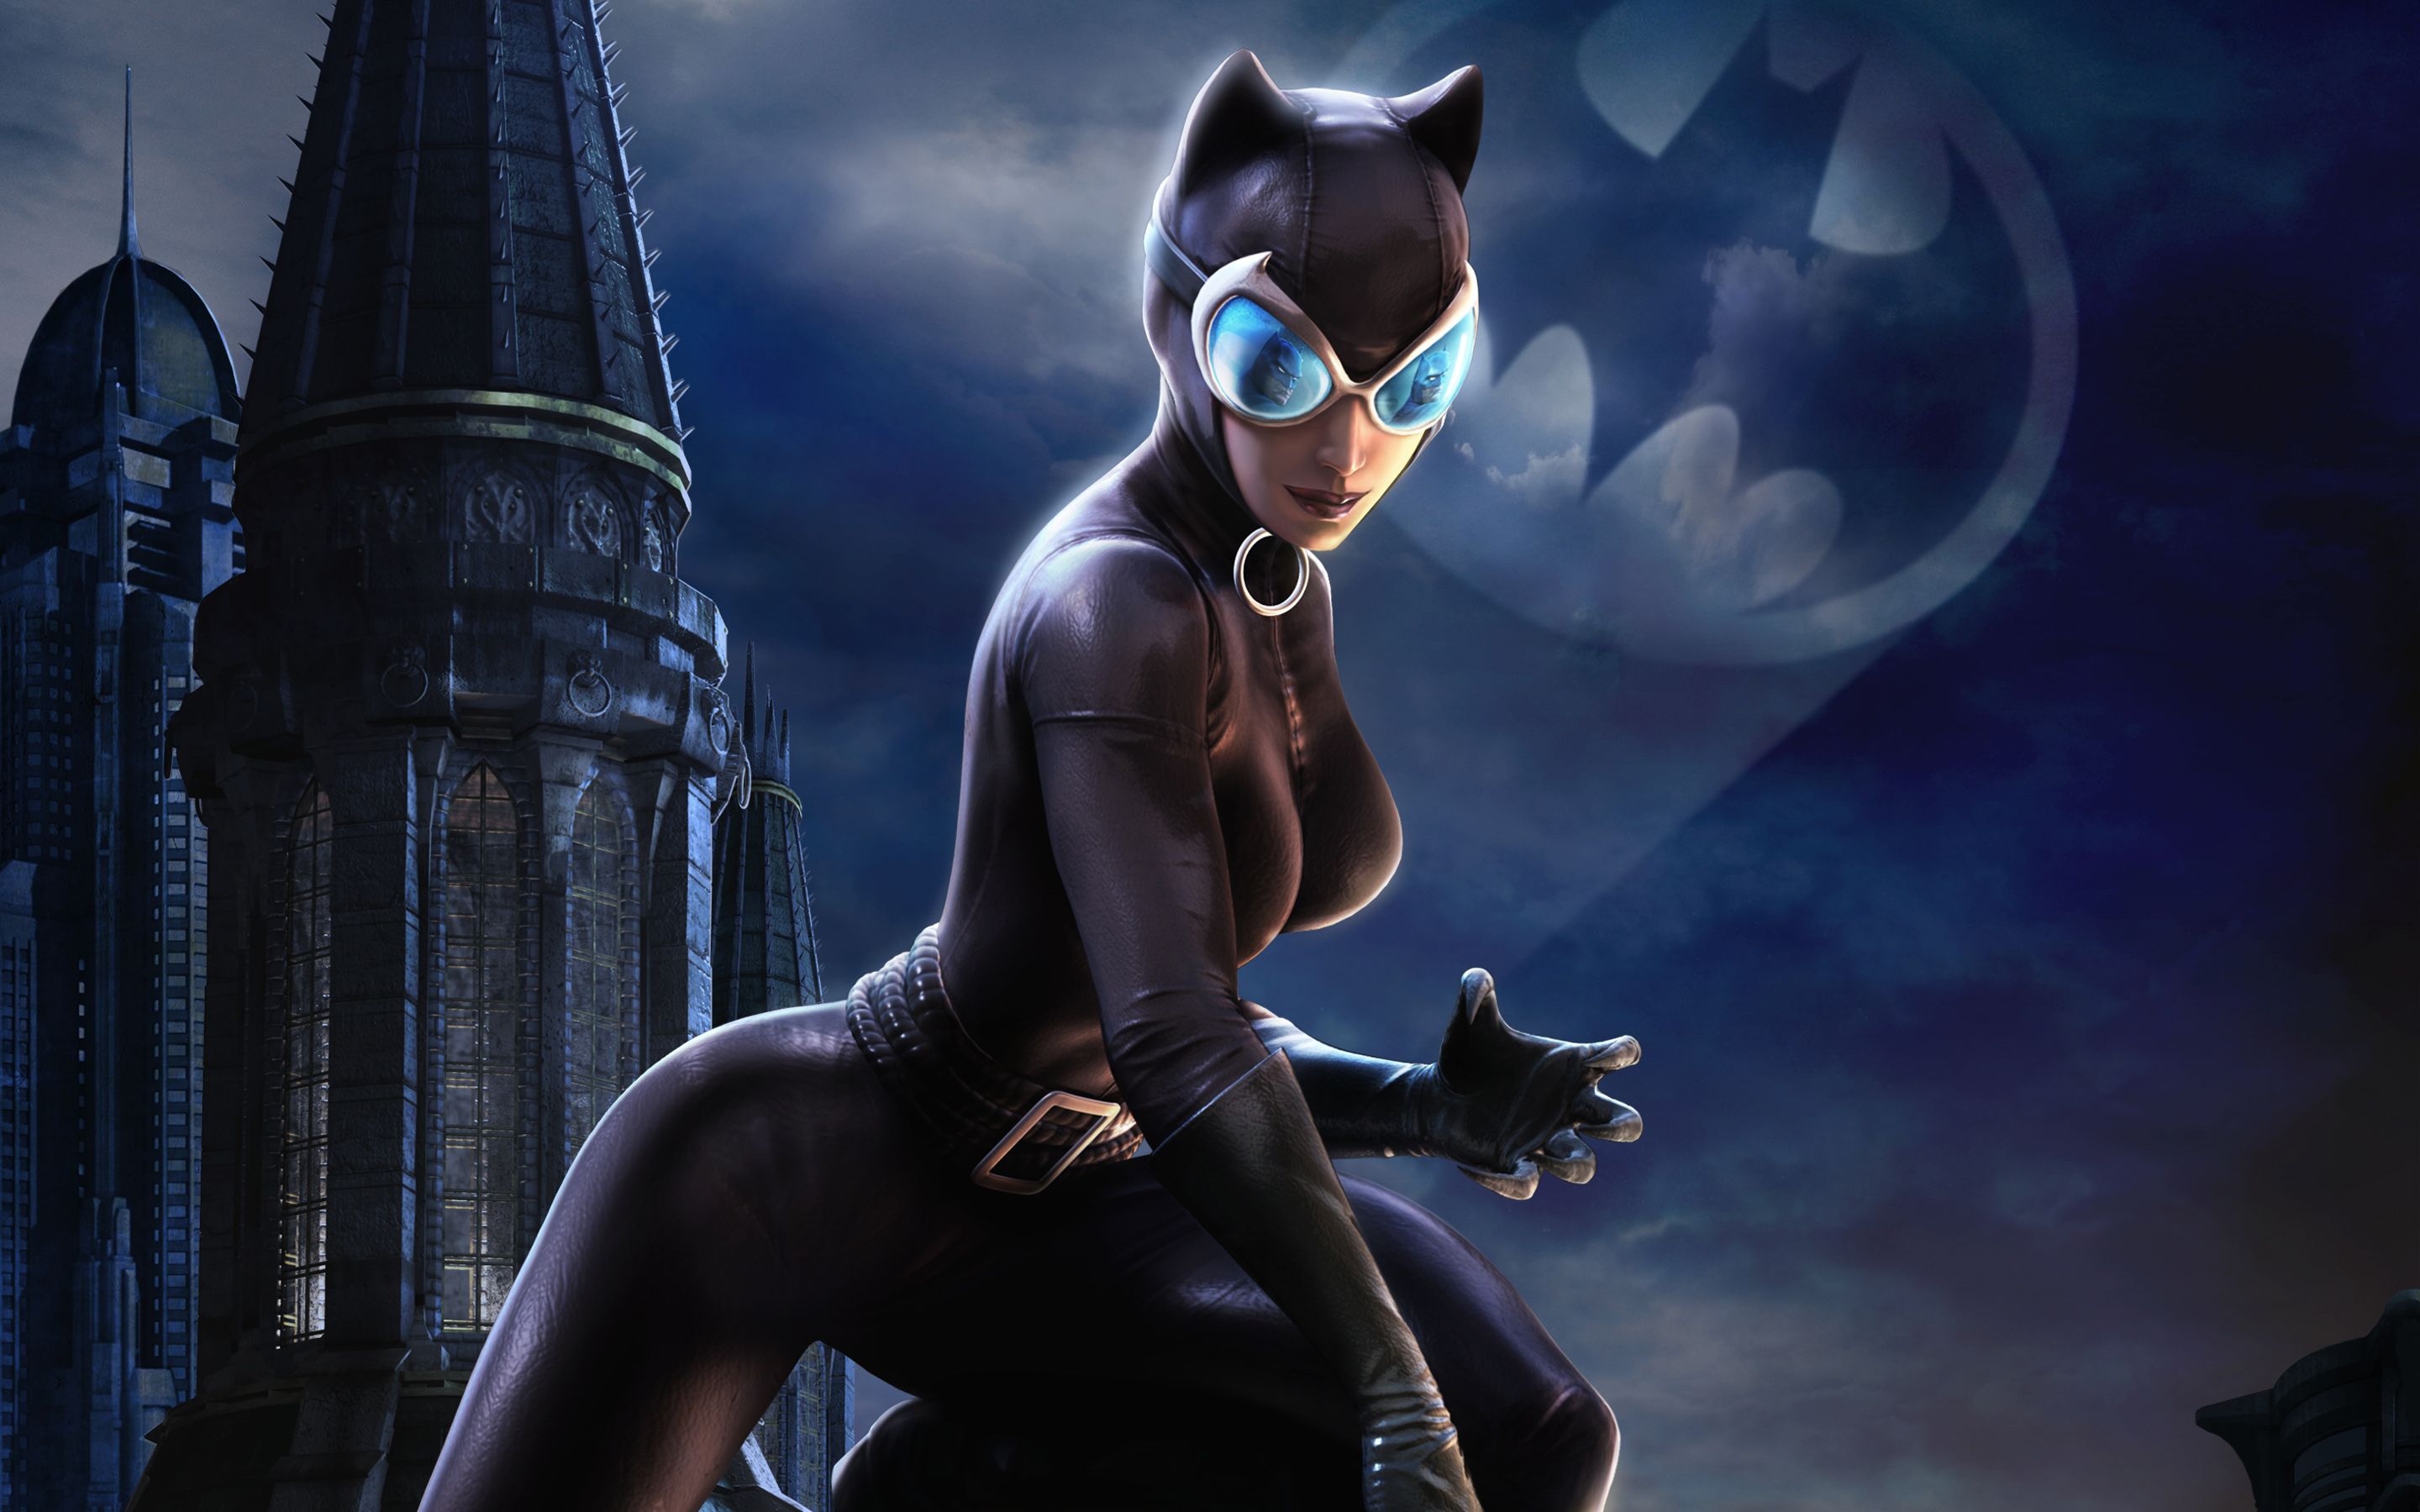 Catwoman 4K wallpaper for your desktop or mobile screen free